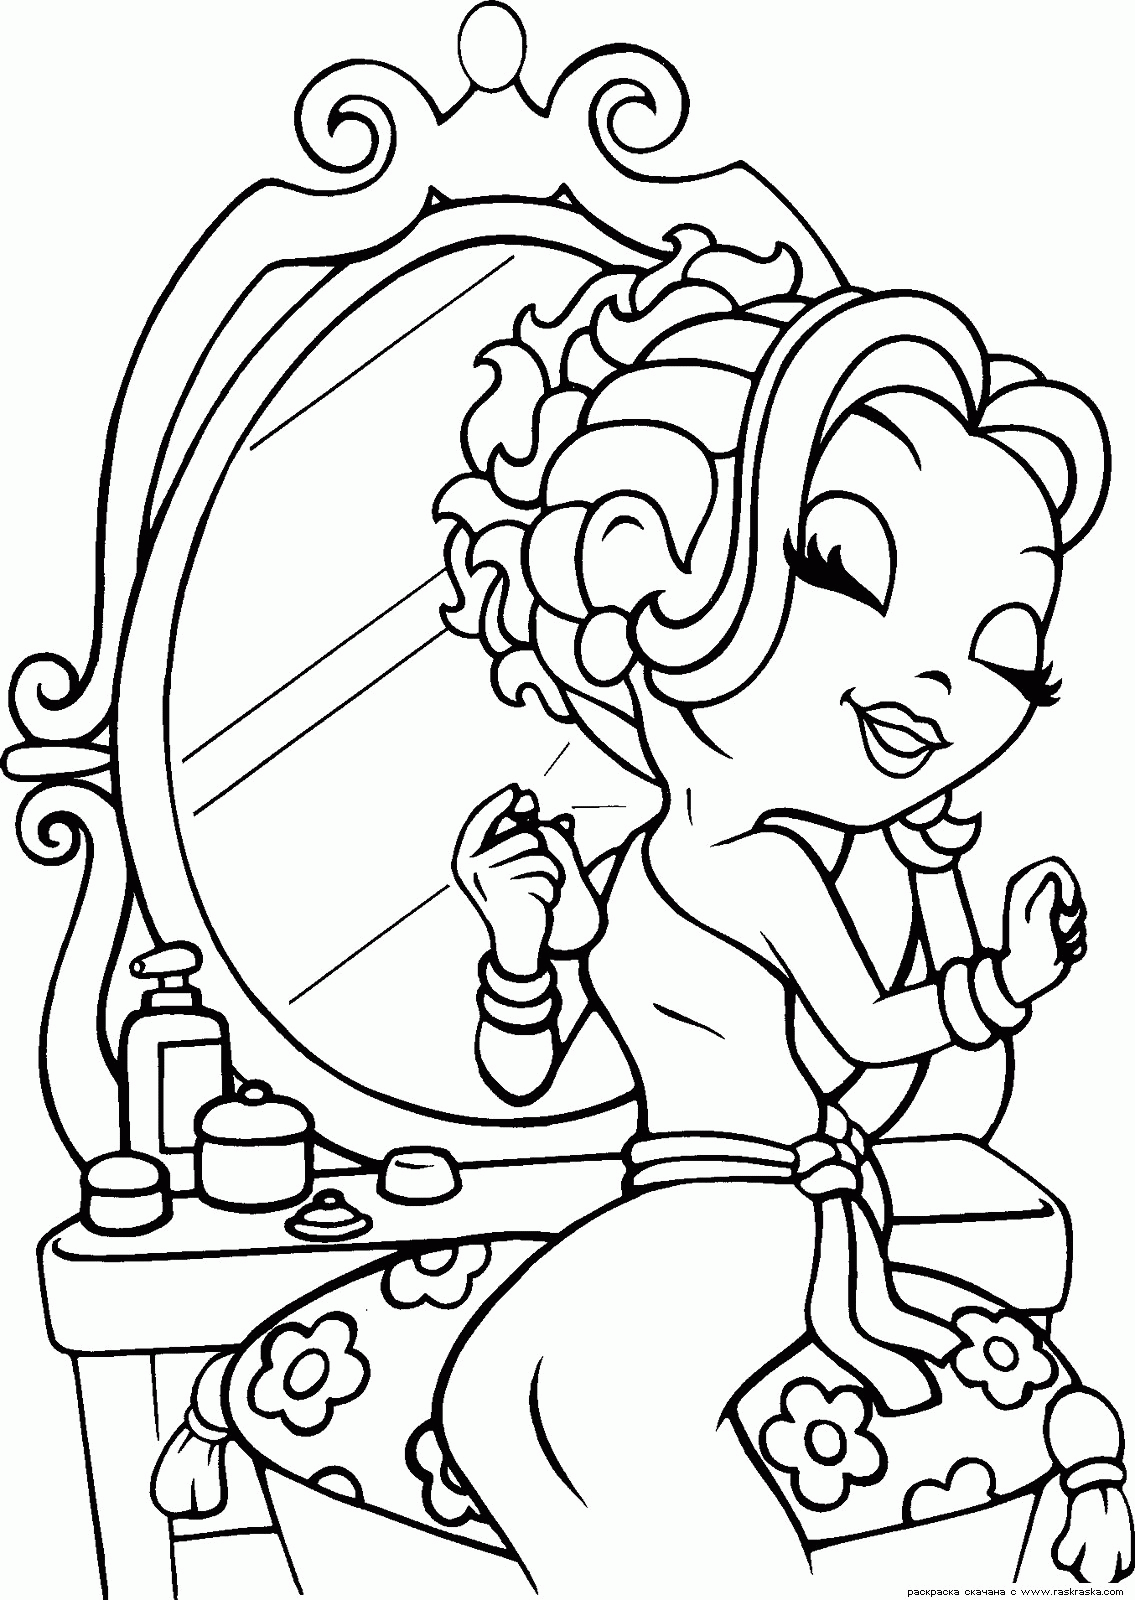 Download Printable Lisa Frank Coloring Pages Free - Coloring Home